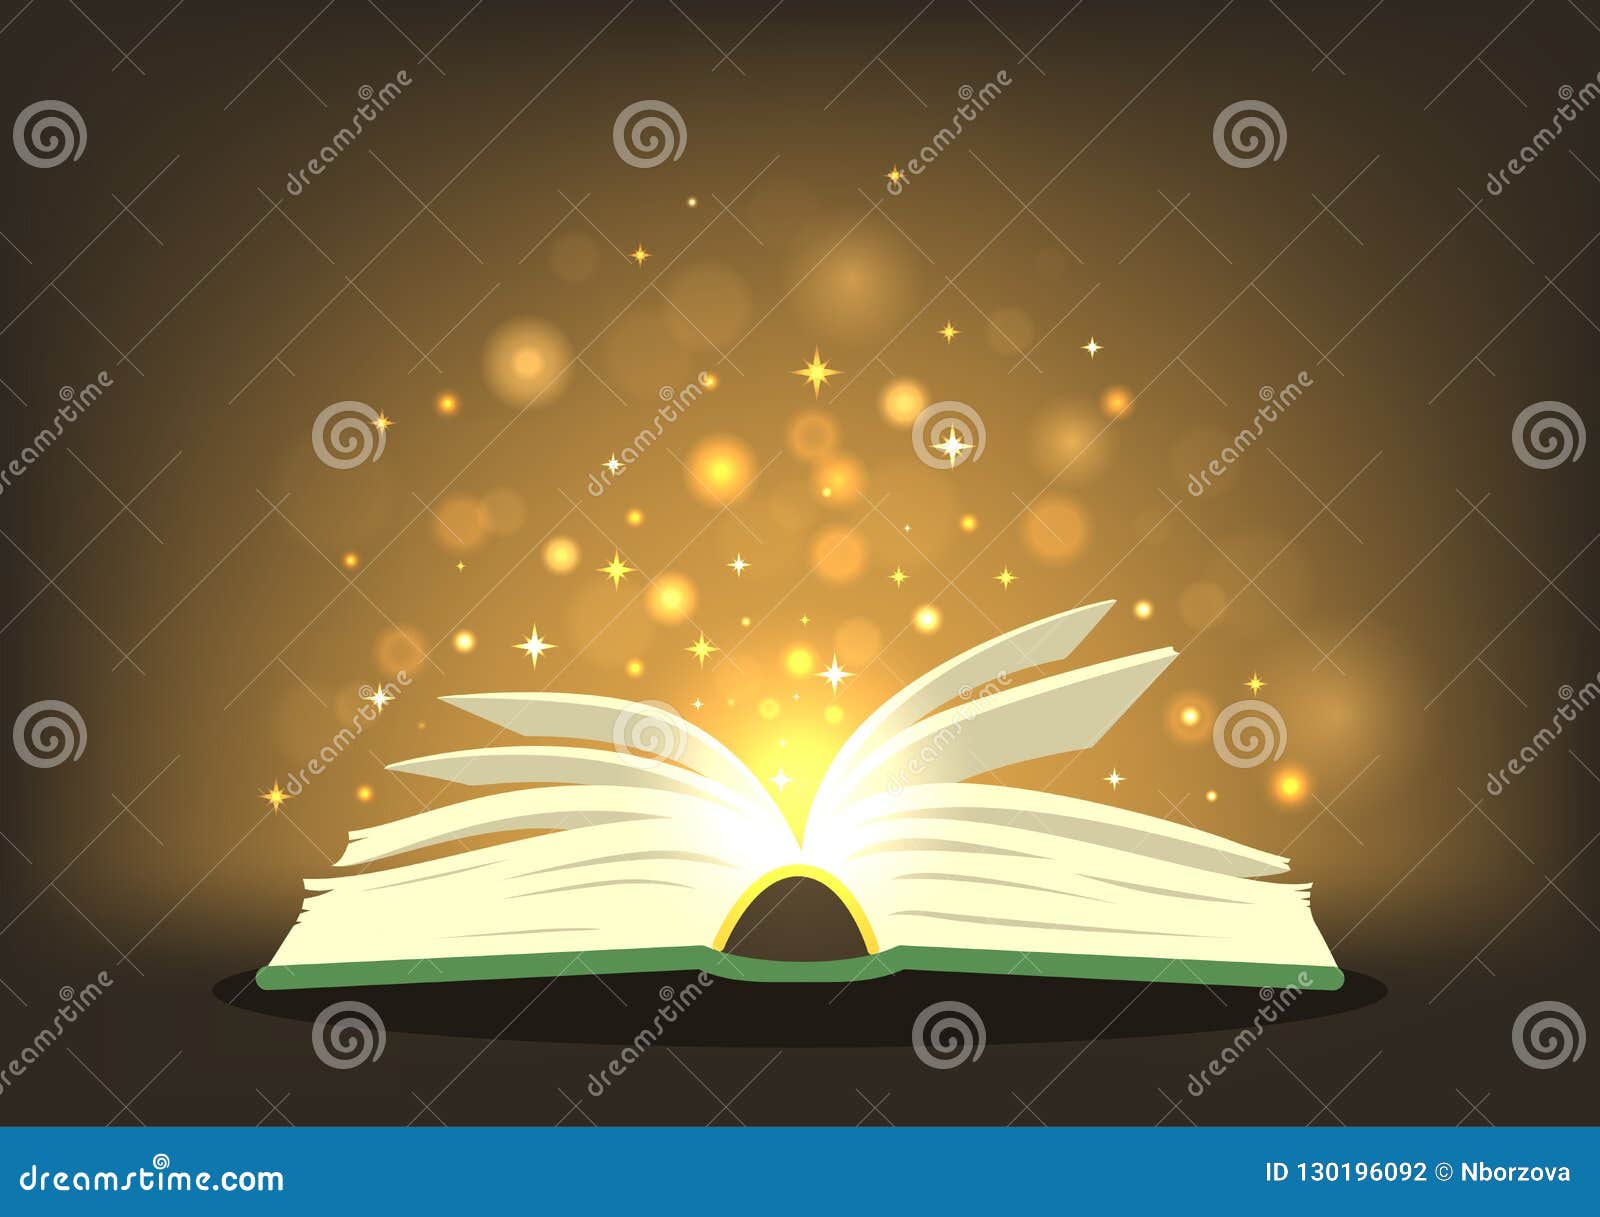 Image of Opened Magic Book with Magic Lights